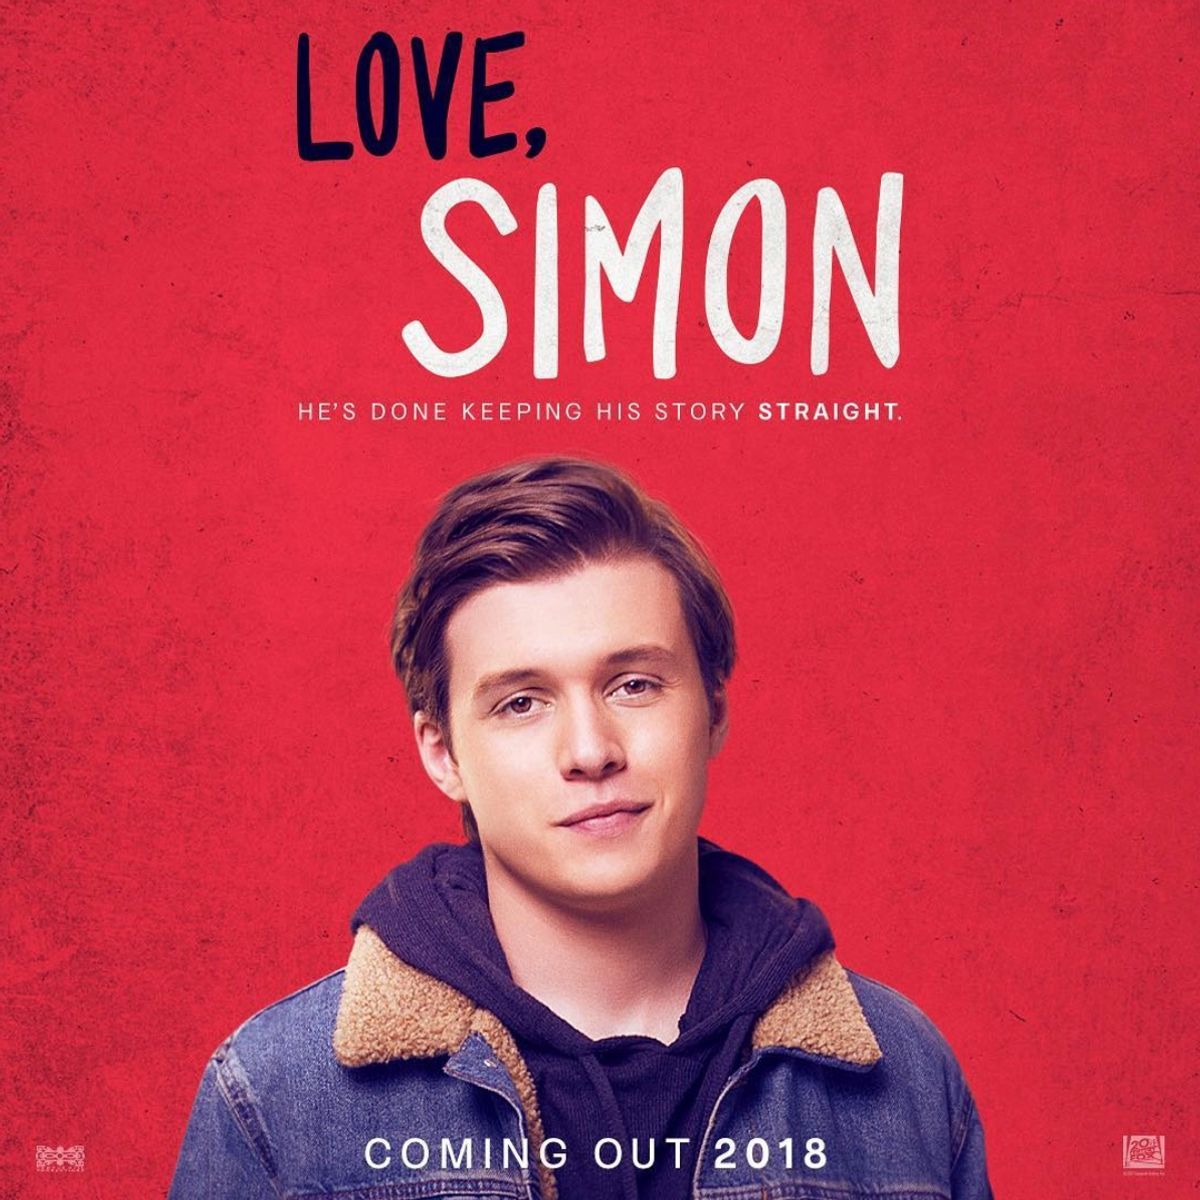 Here's Why You, Yes You, Need To Go See Love, Simon